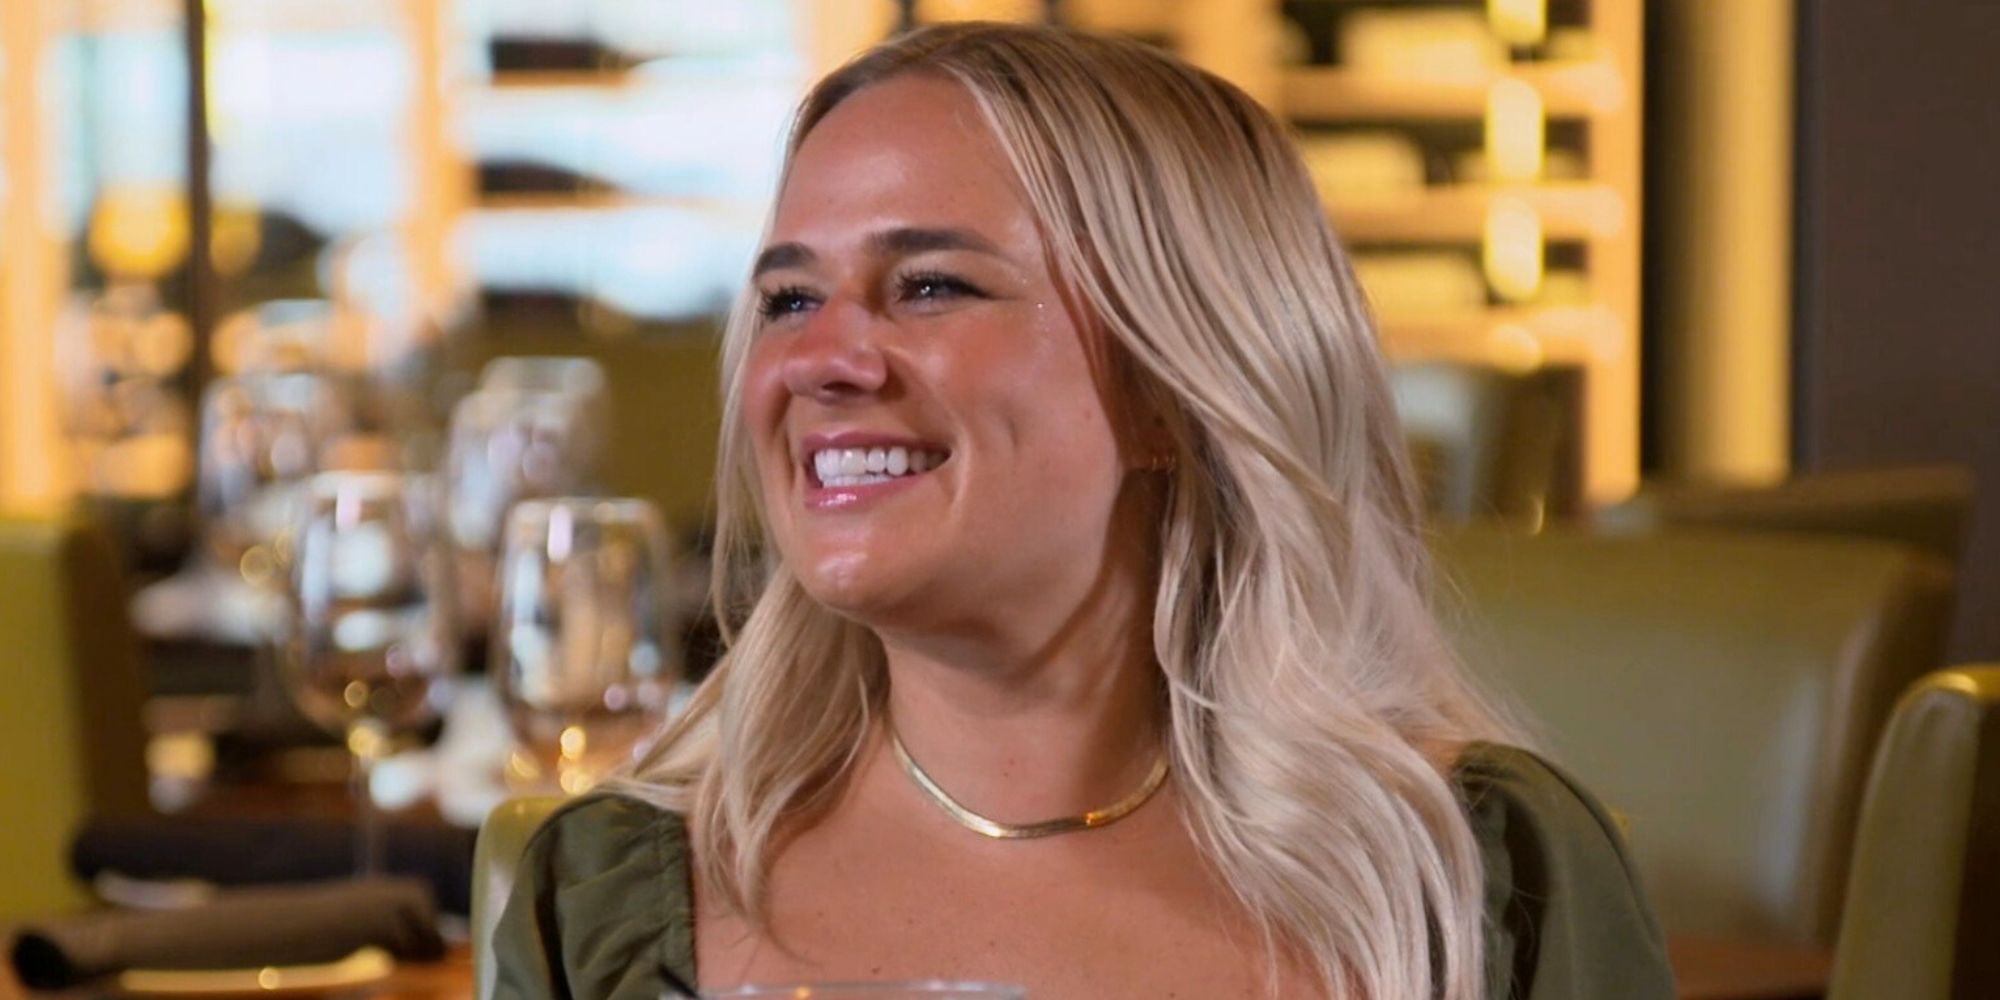 Emily Married at First Sight season 17 in green dress smiling